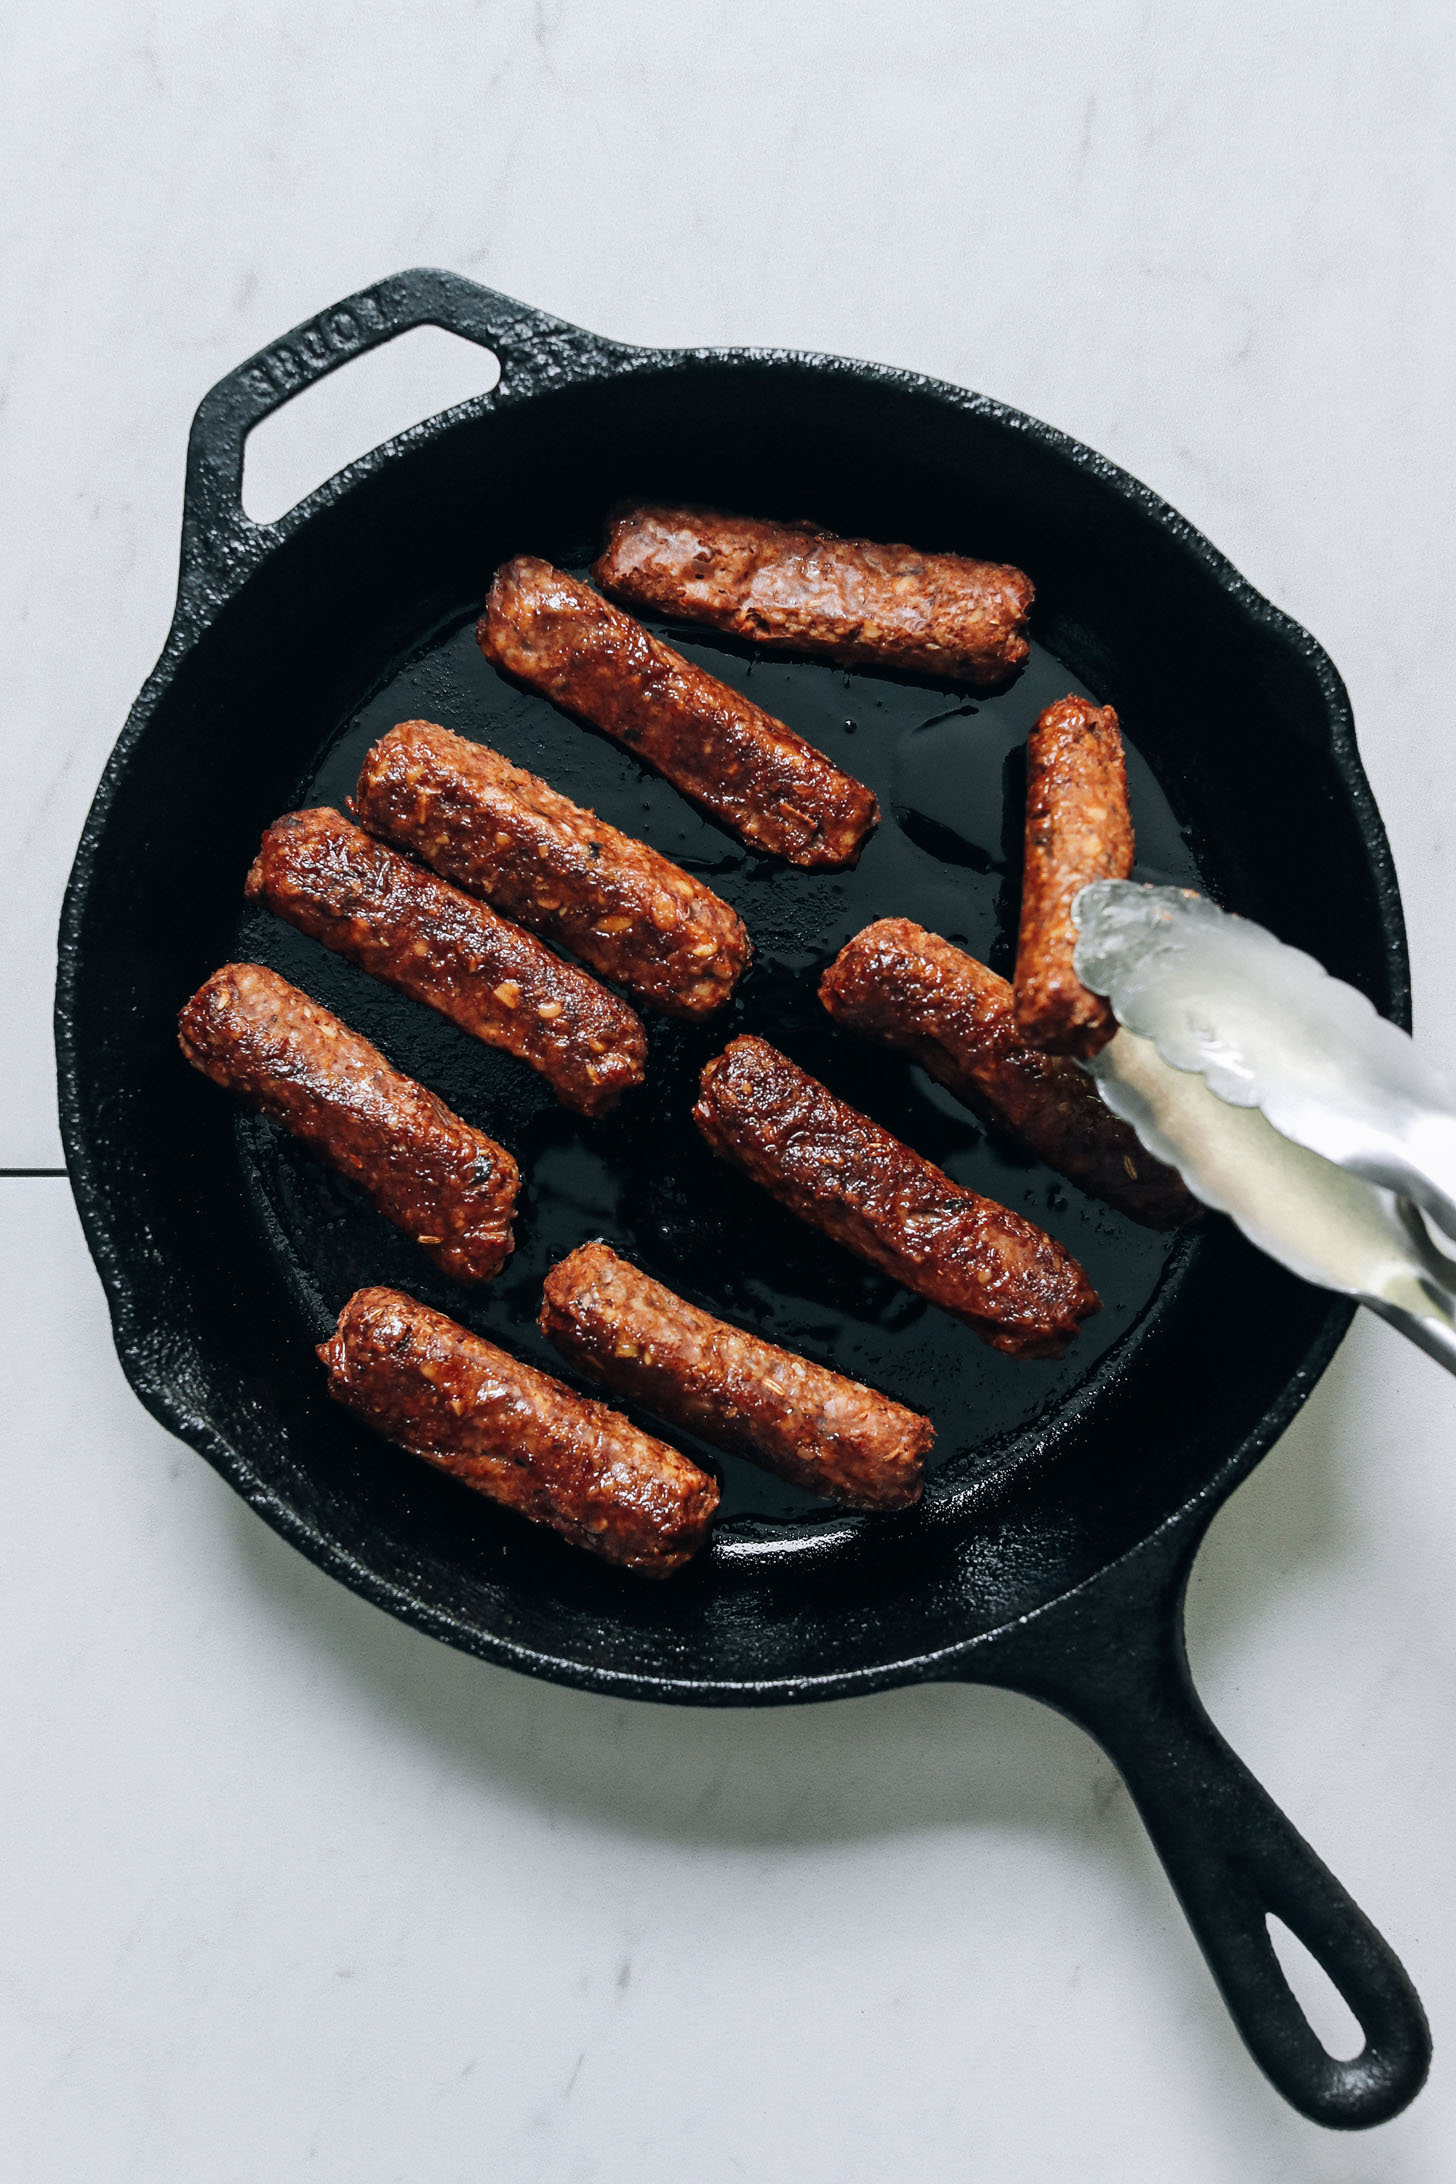 Cooking vegan sausage links in a cast iron skillet